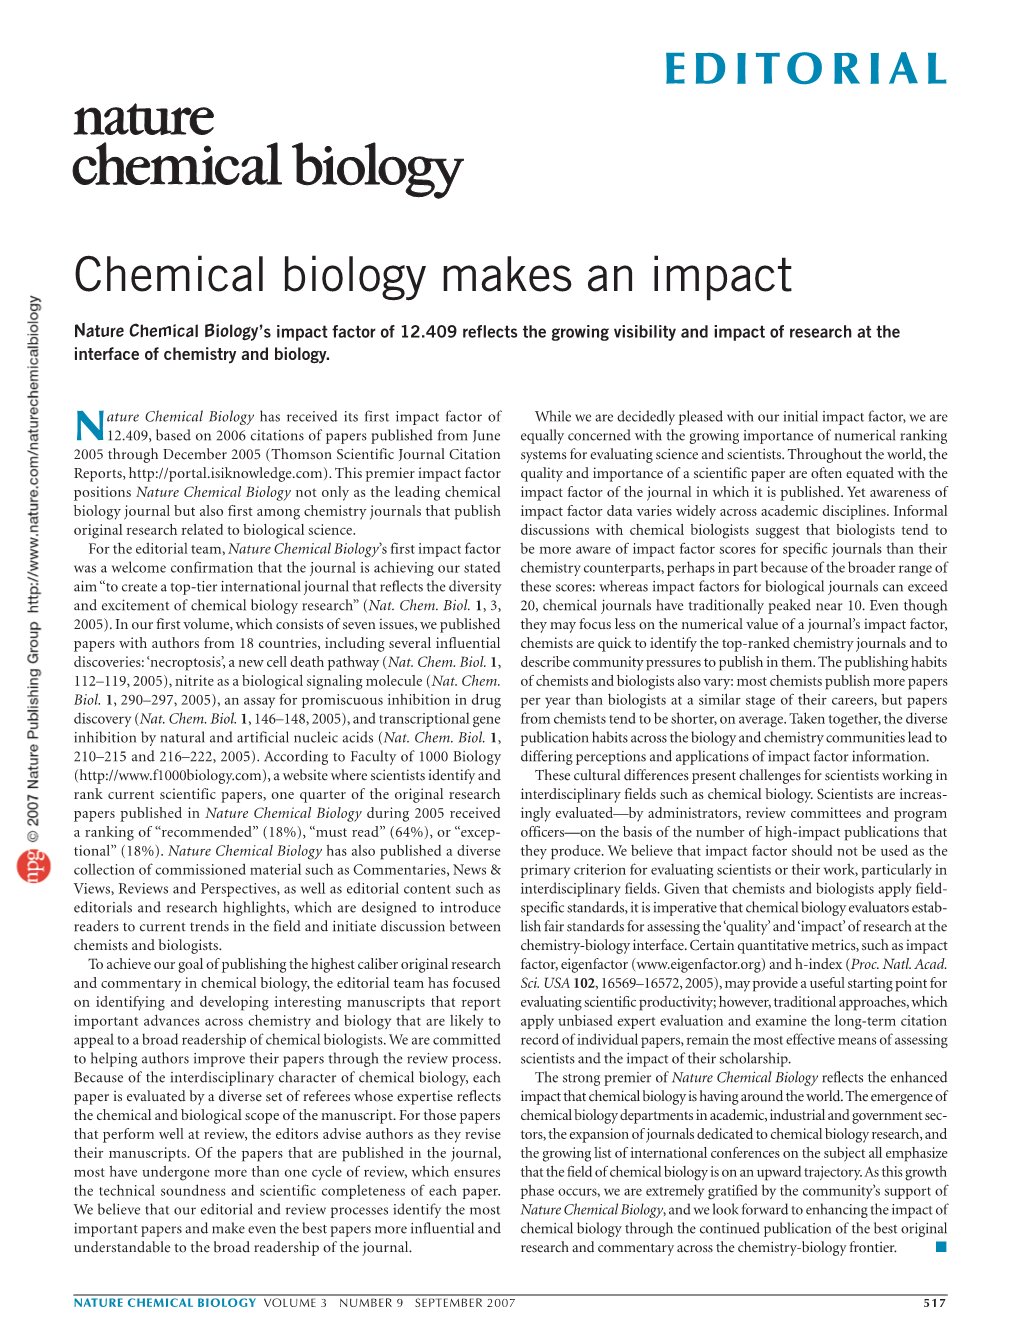 Chemical Biology Makes an Impact